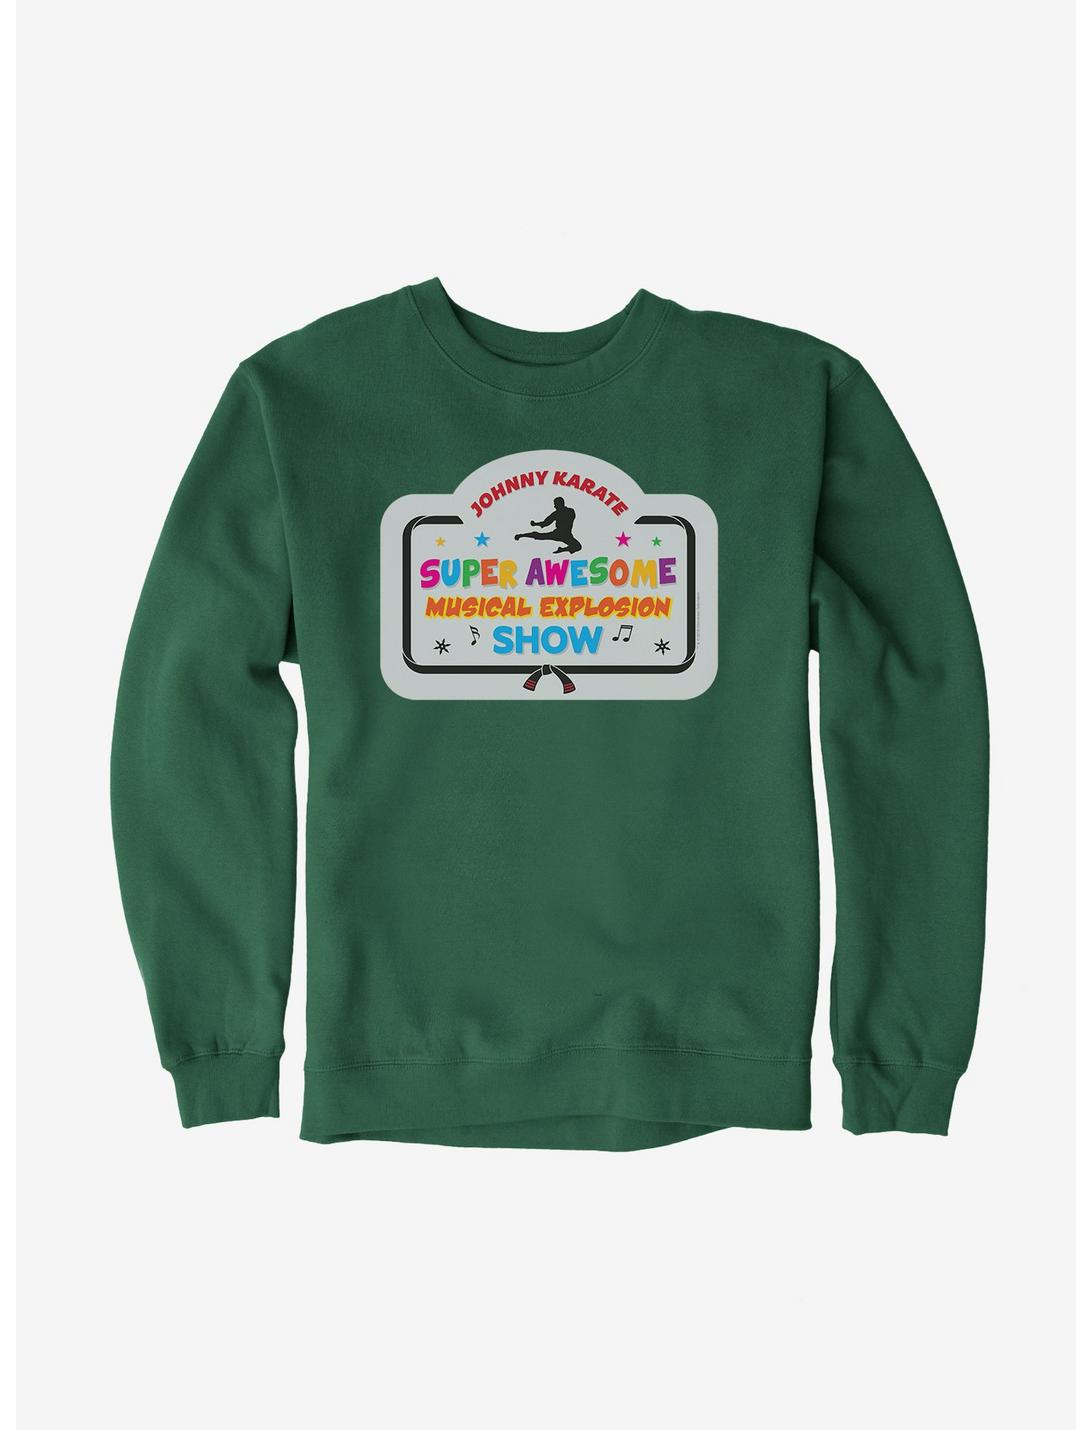 Parks And Recreation Johnny Karate Show Banner Sweatshirt, FOREST GREEN, hi-res